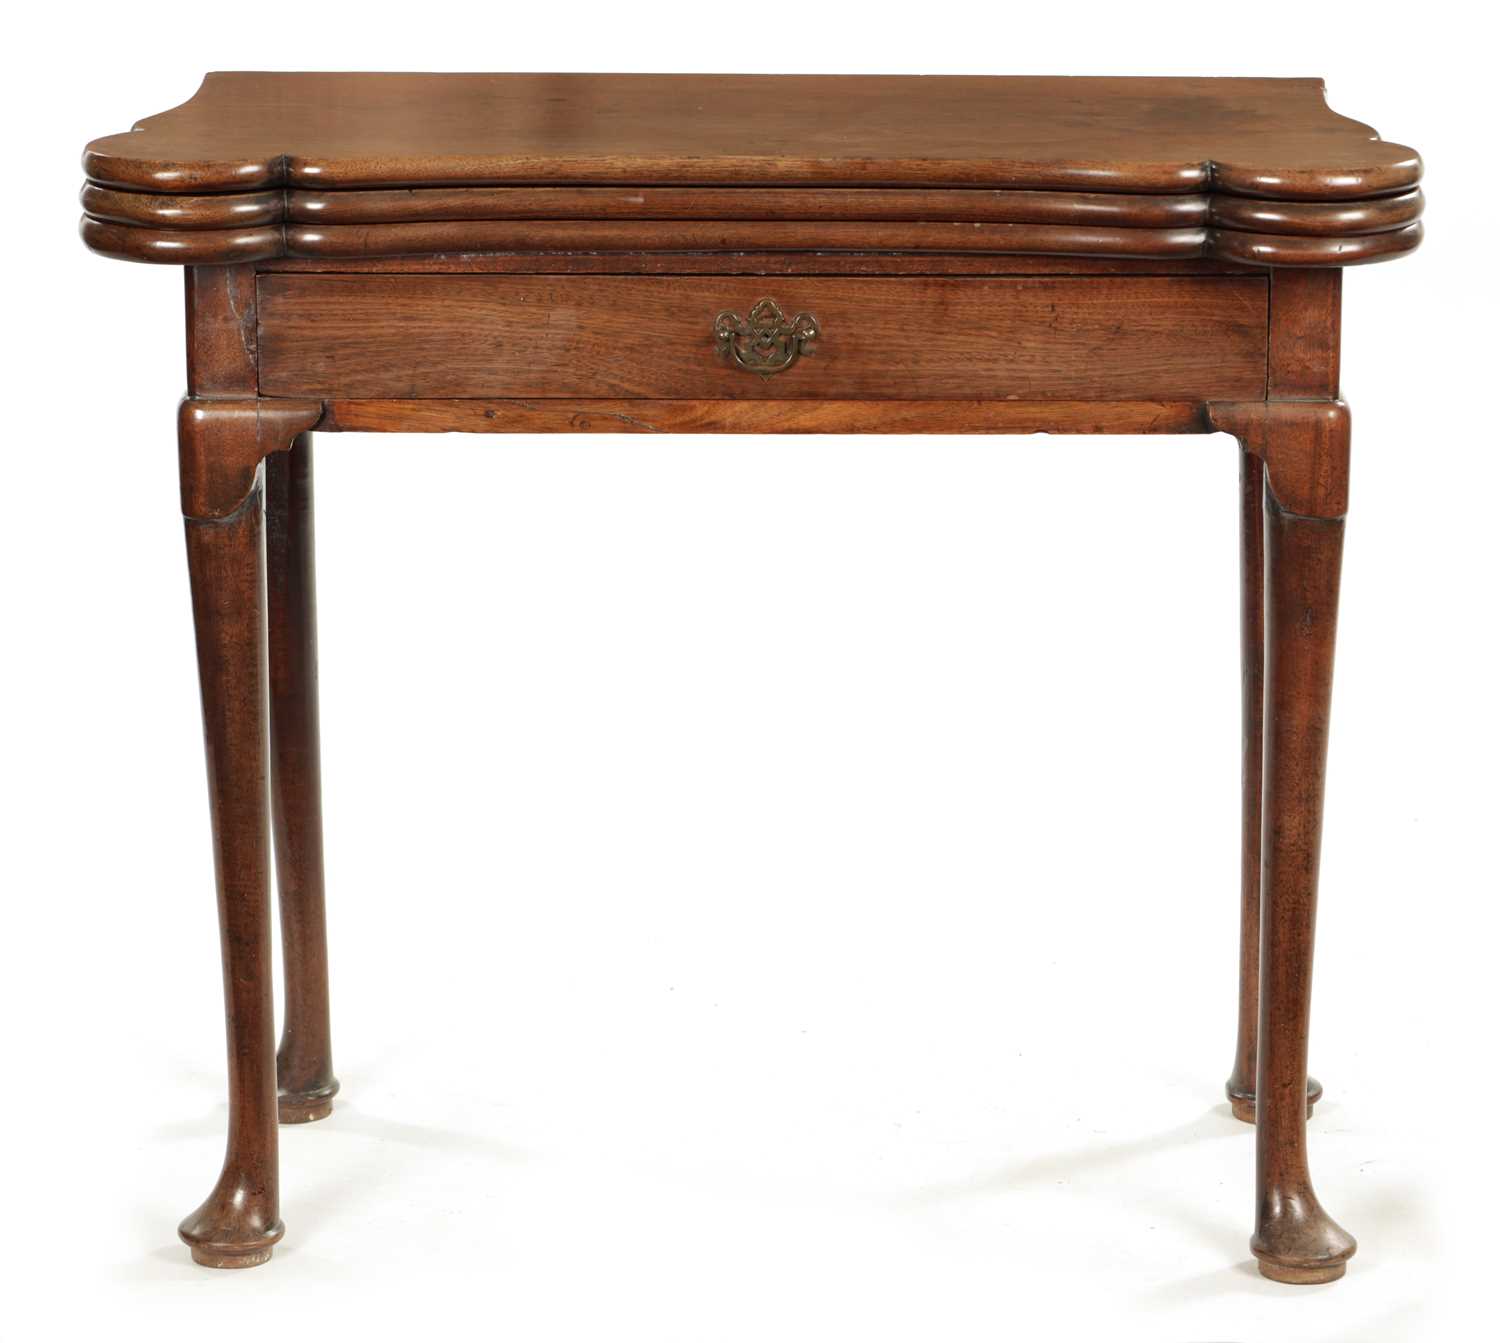 A GEORGE II FIGURED MAHOGANY TRIPLE TOP FOLD-OVER GAMES TABLE